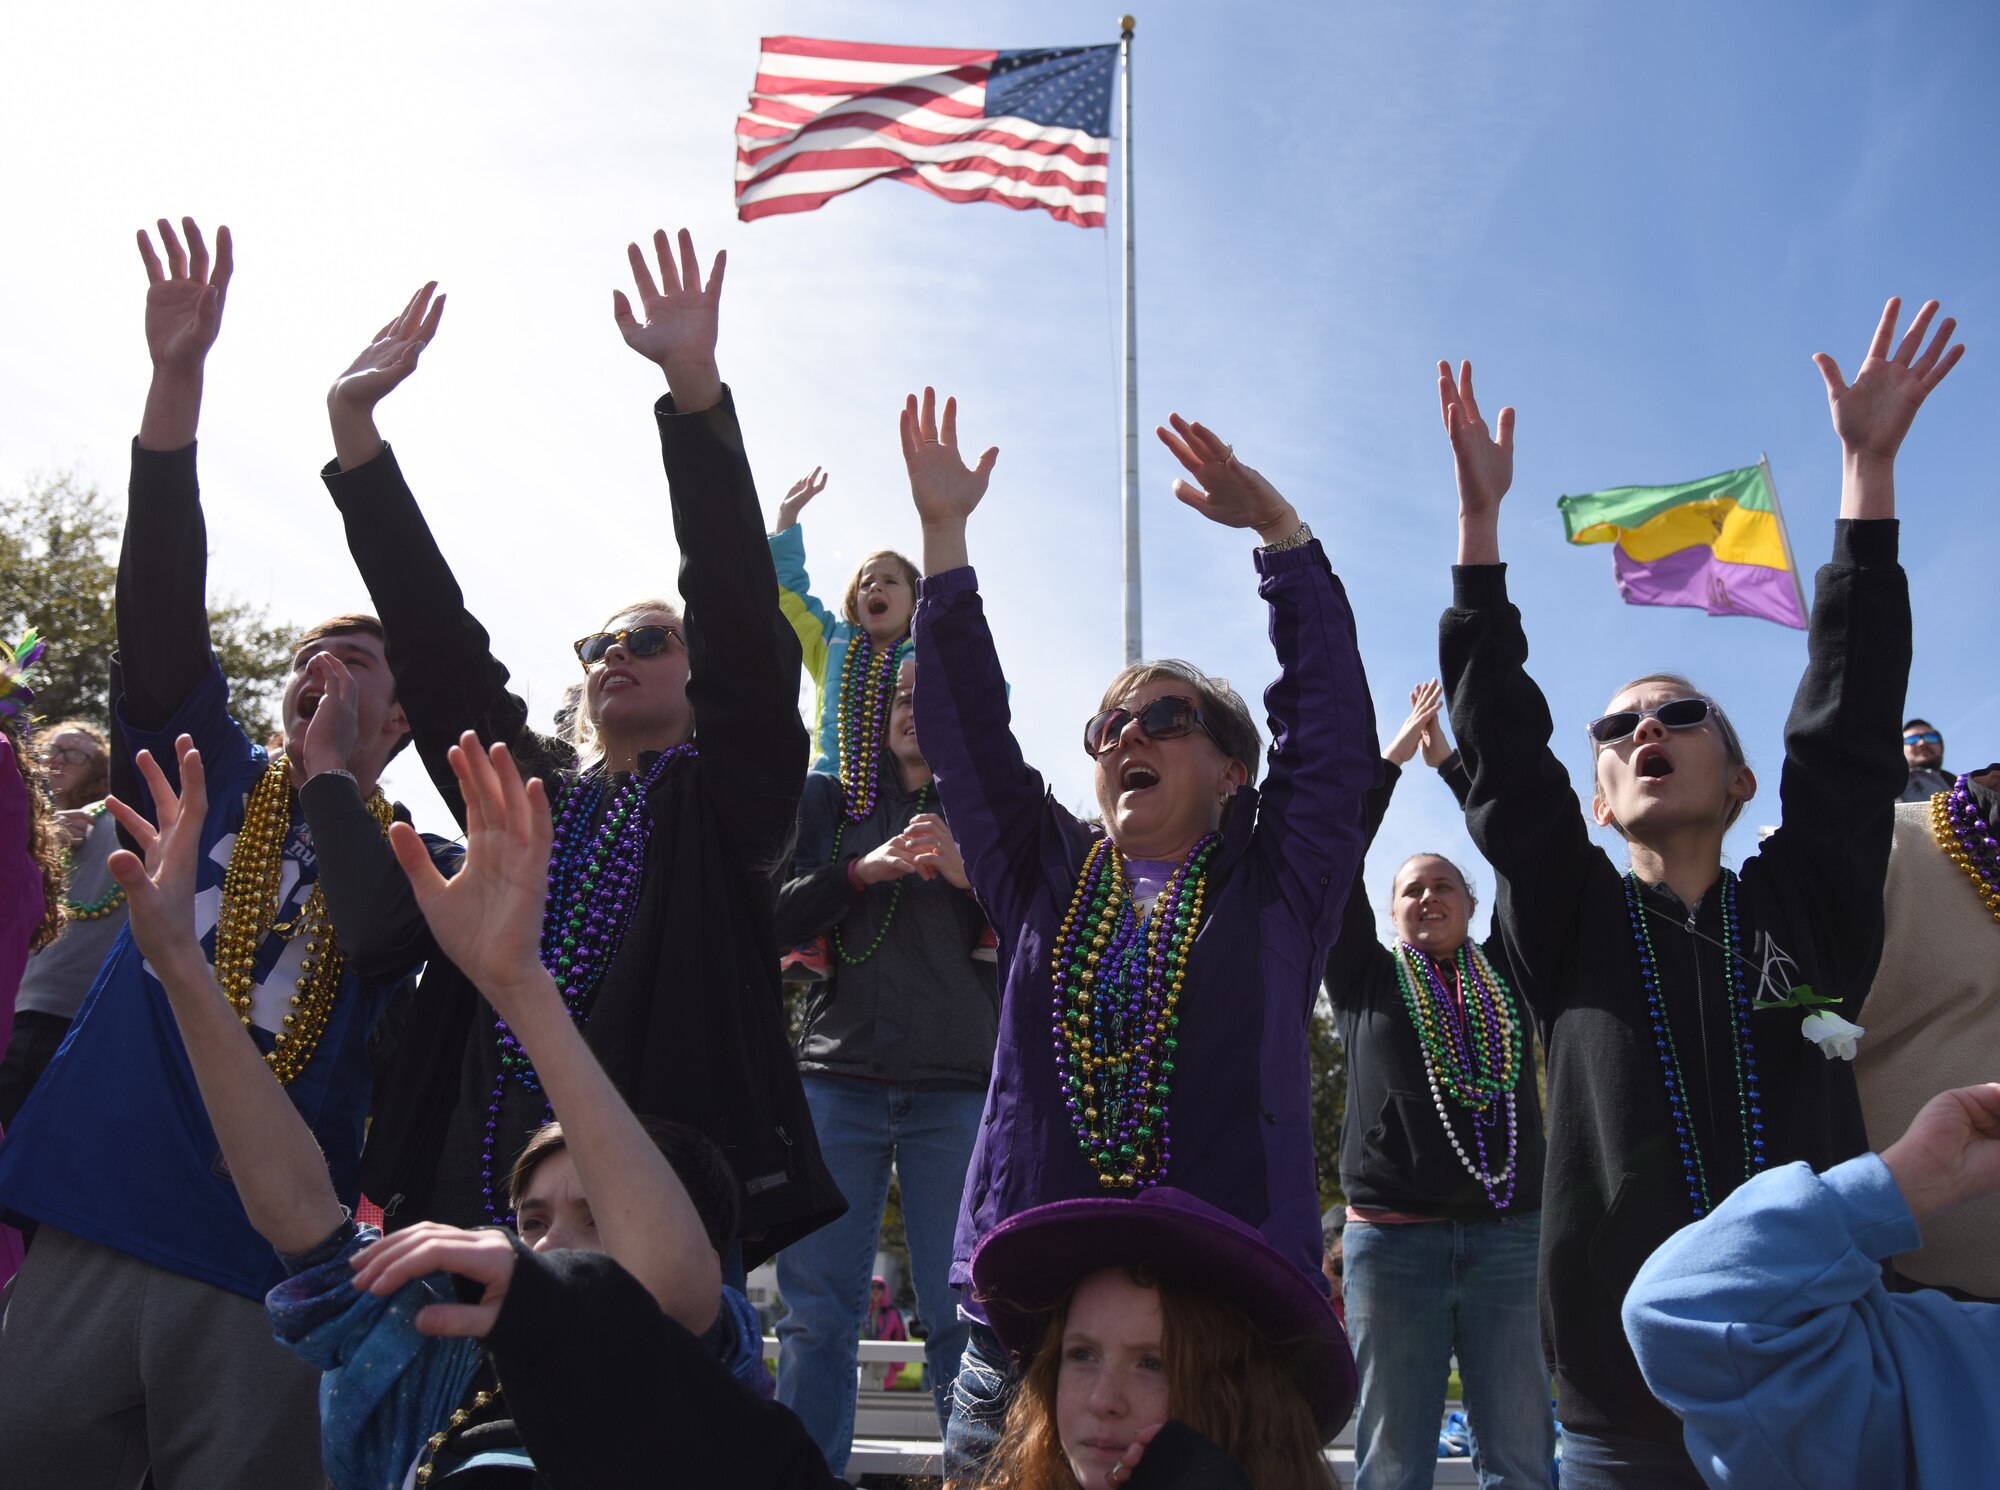 Keesler personnel and their families raise their hands and yell for "throws" from parade floats during the Gulf Coast Carnival Association Mardi Gras parade in Biloxi, Mississippi, March 5, 2019. Keesler personnel participate in local parades every Mardi Gras season to show their support of the communities surrounding the installation. (U.S. Air Force photo by Kemberly Groue)